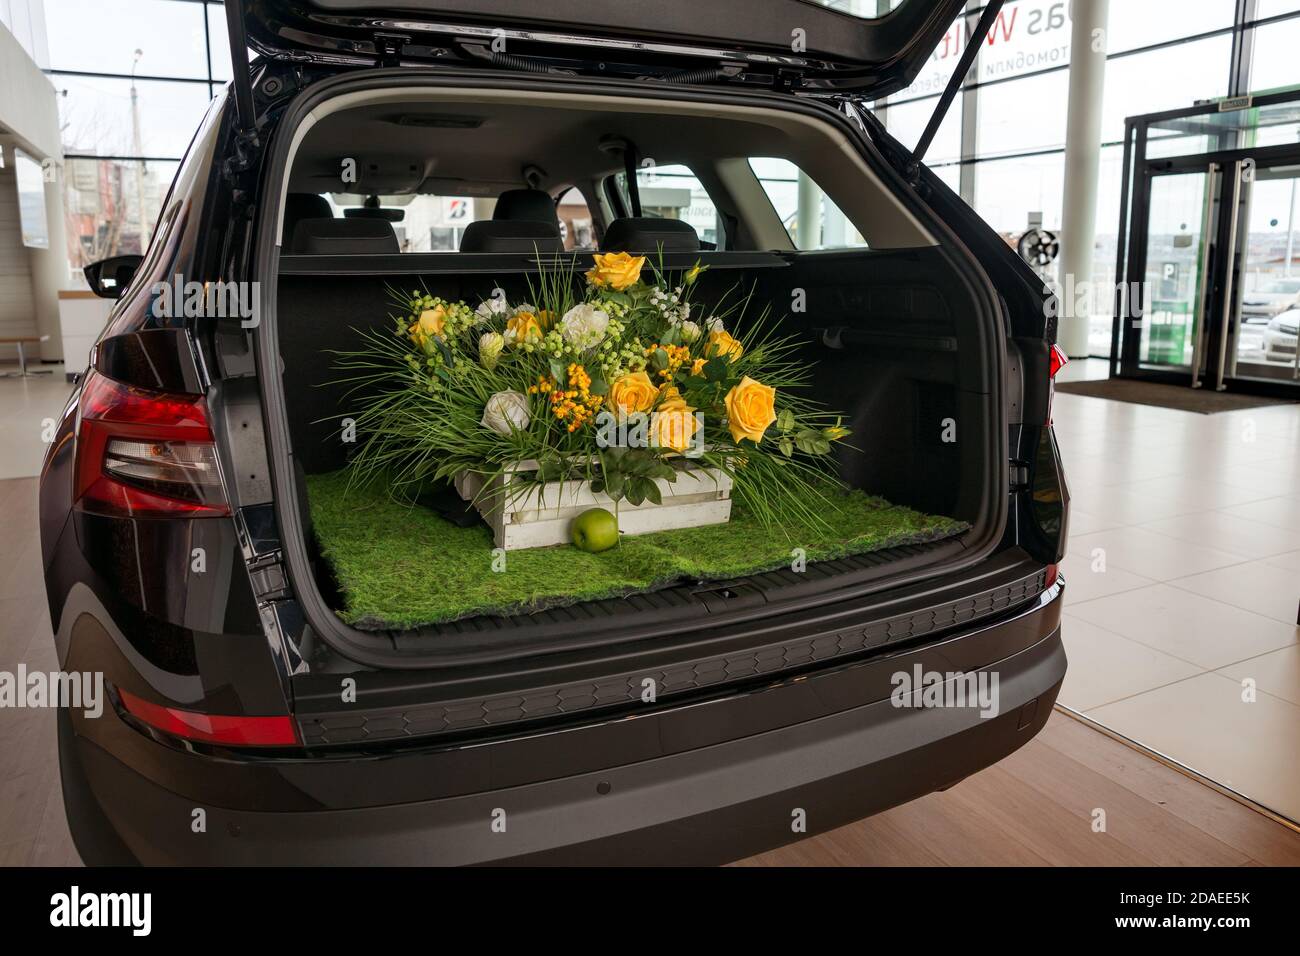 A basket of flowers is in the open trunk of a car on the territory of a car dealership. Stock Photo